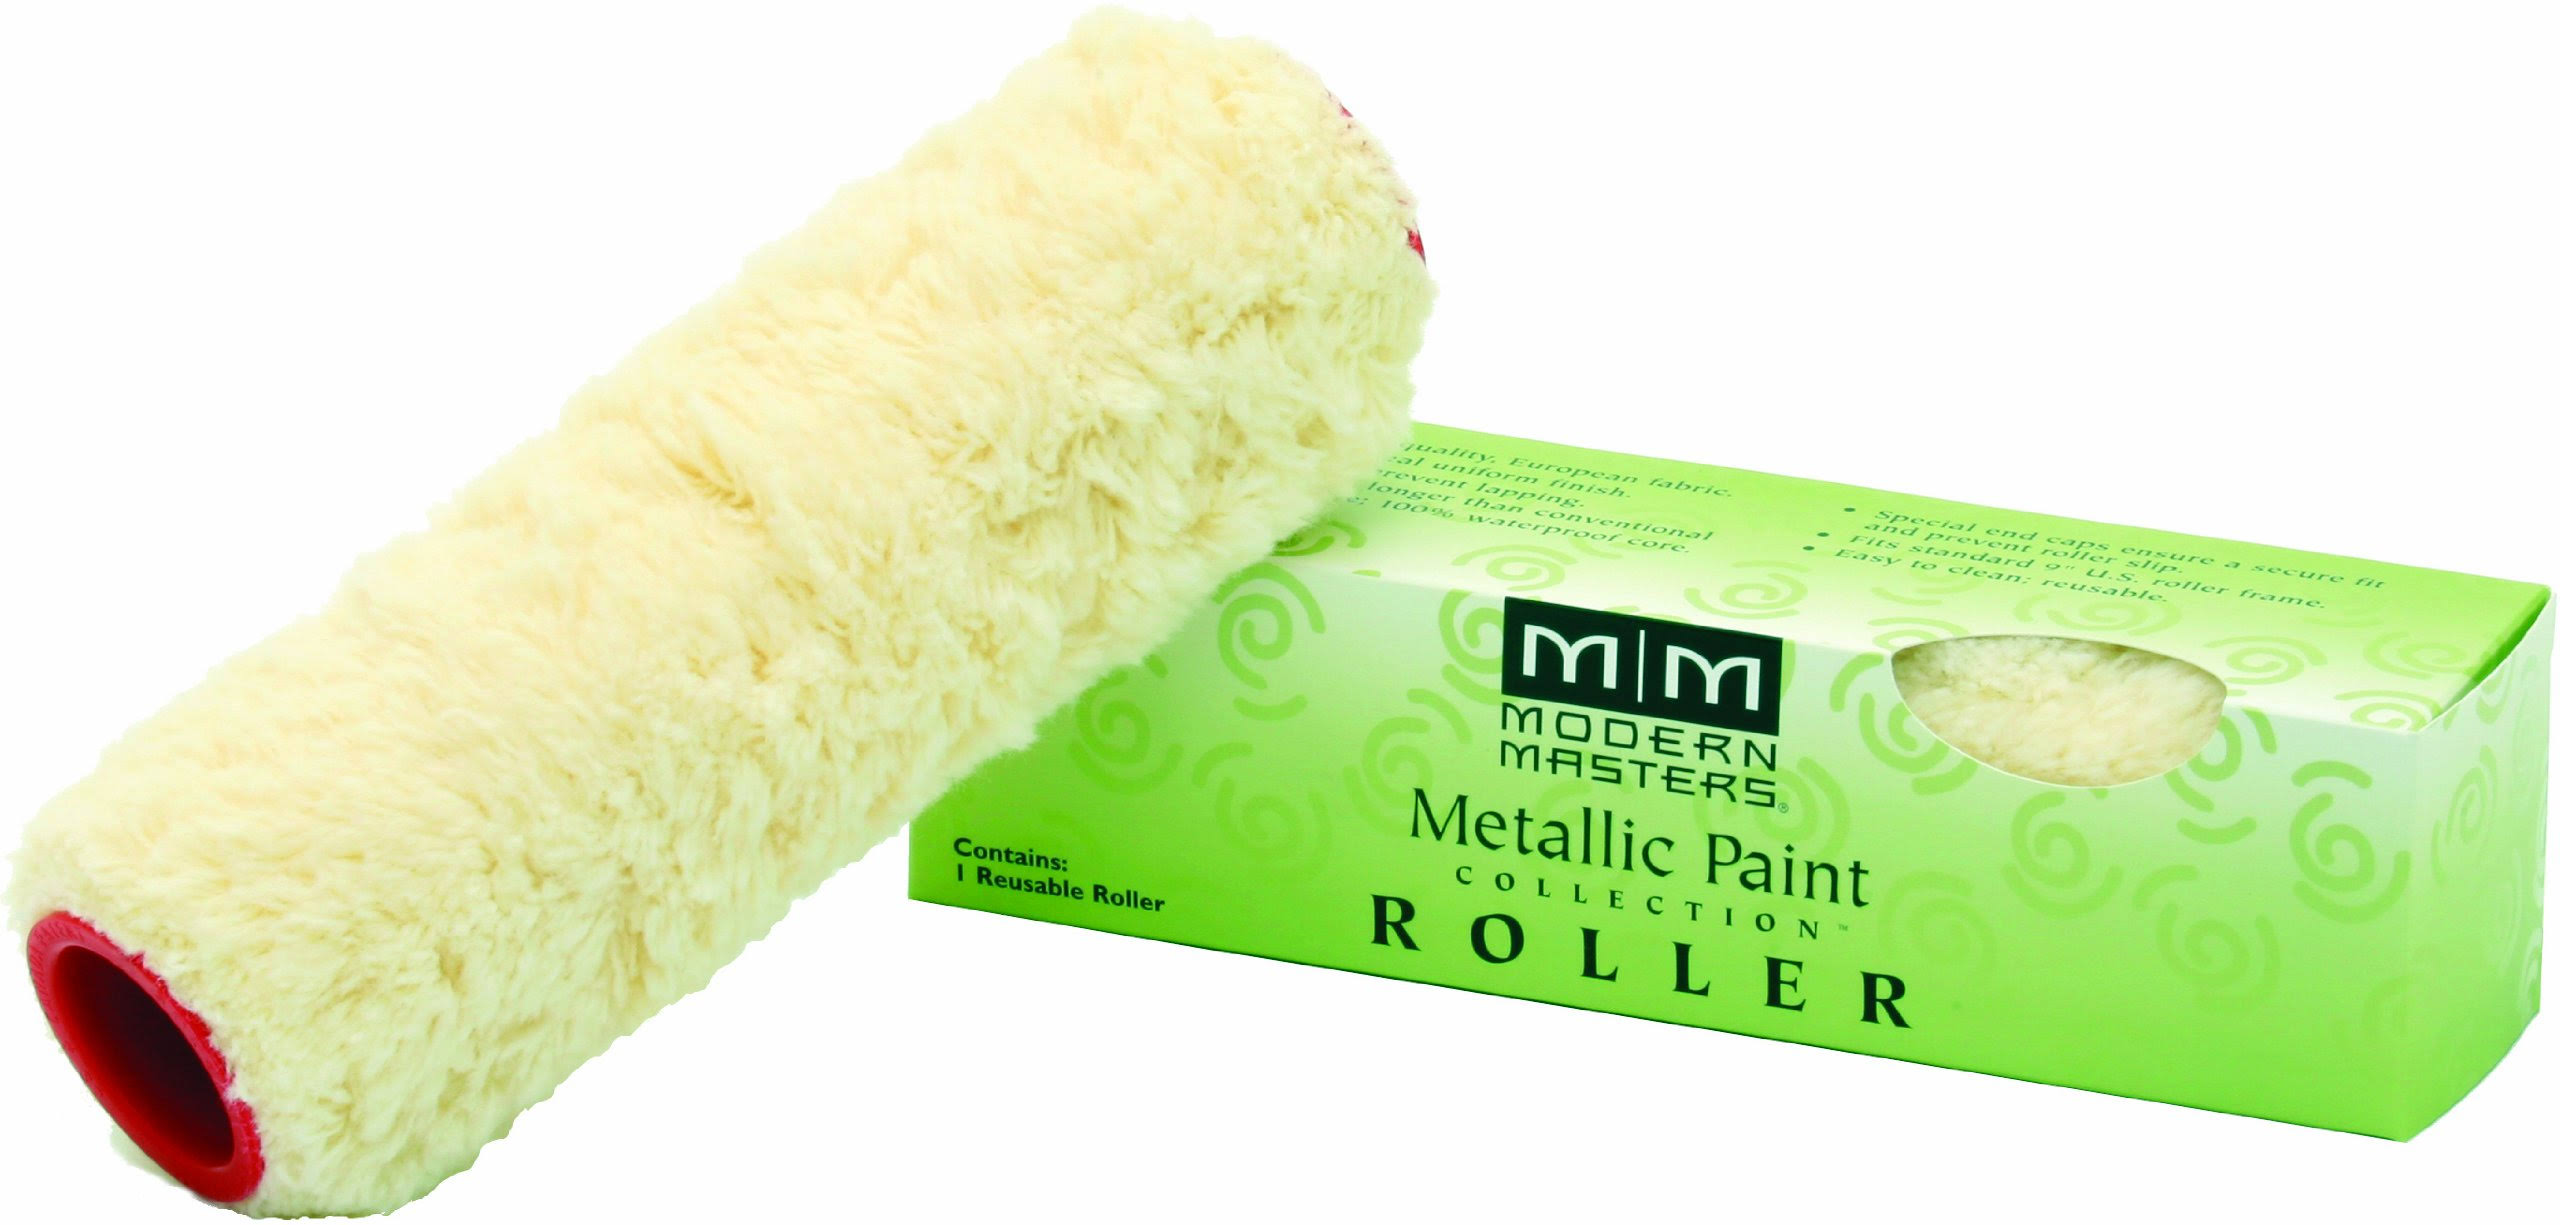 Modern Masters Metallic Paint Roller Cover